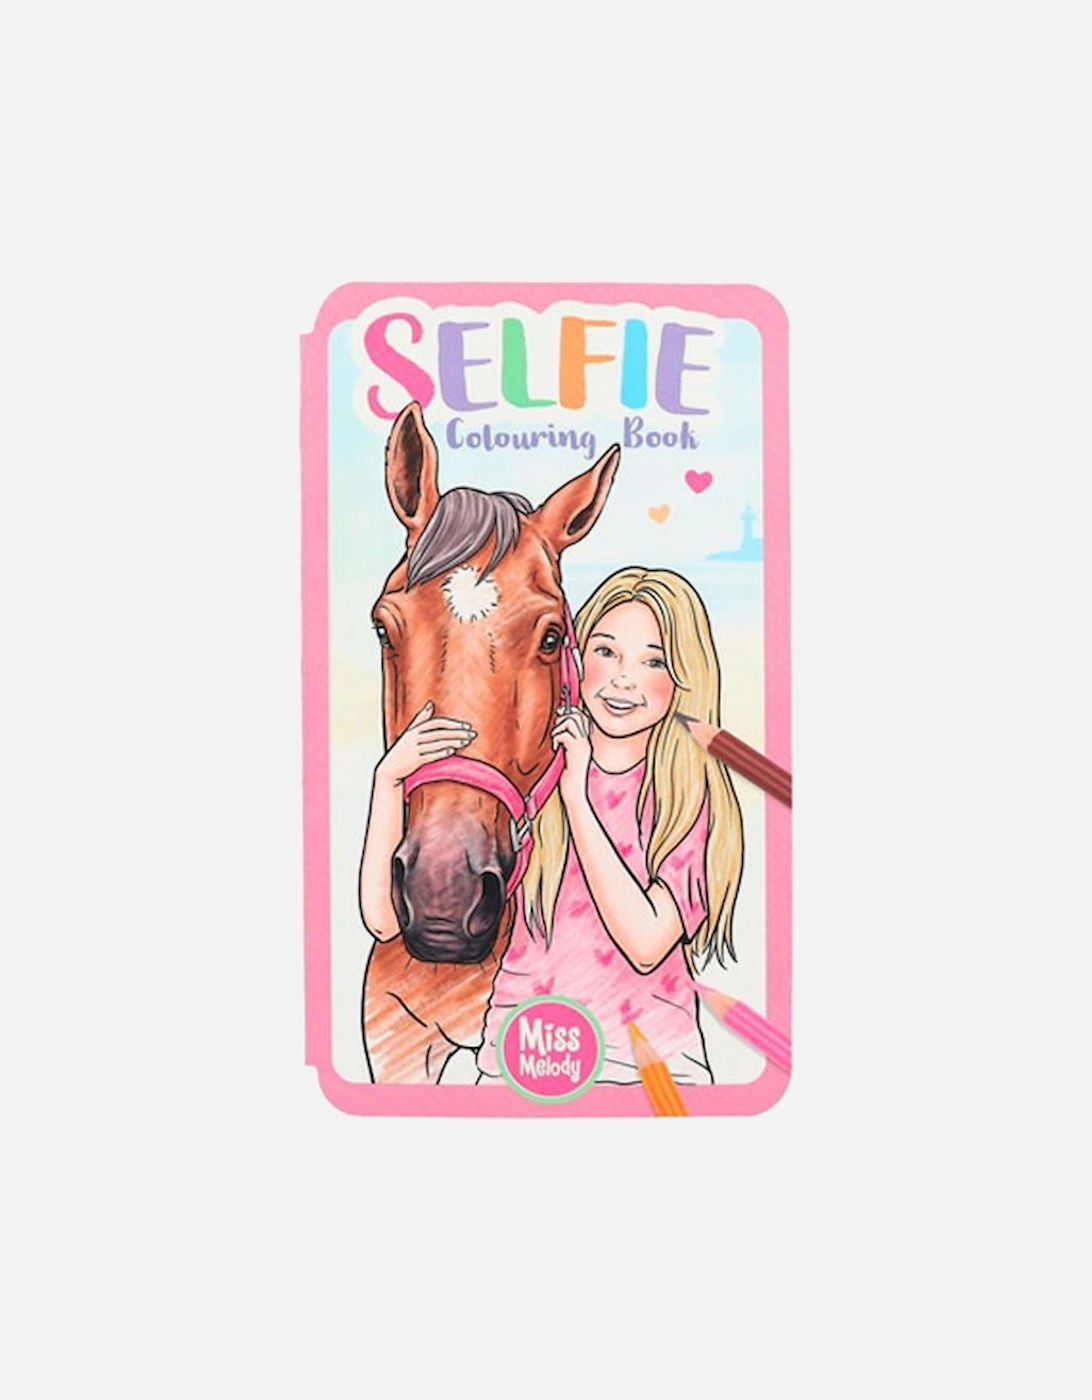 Selfie Colouring Book